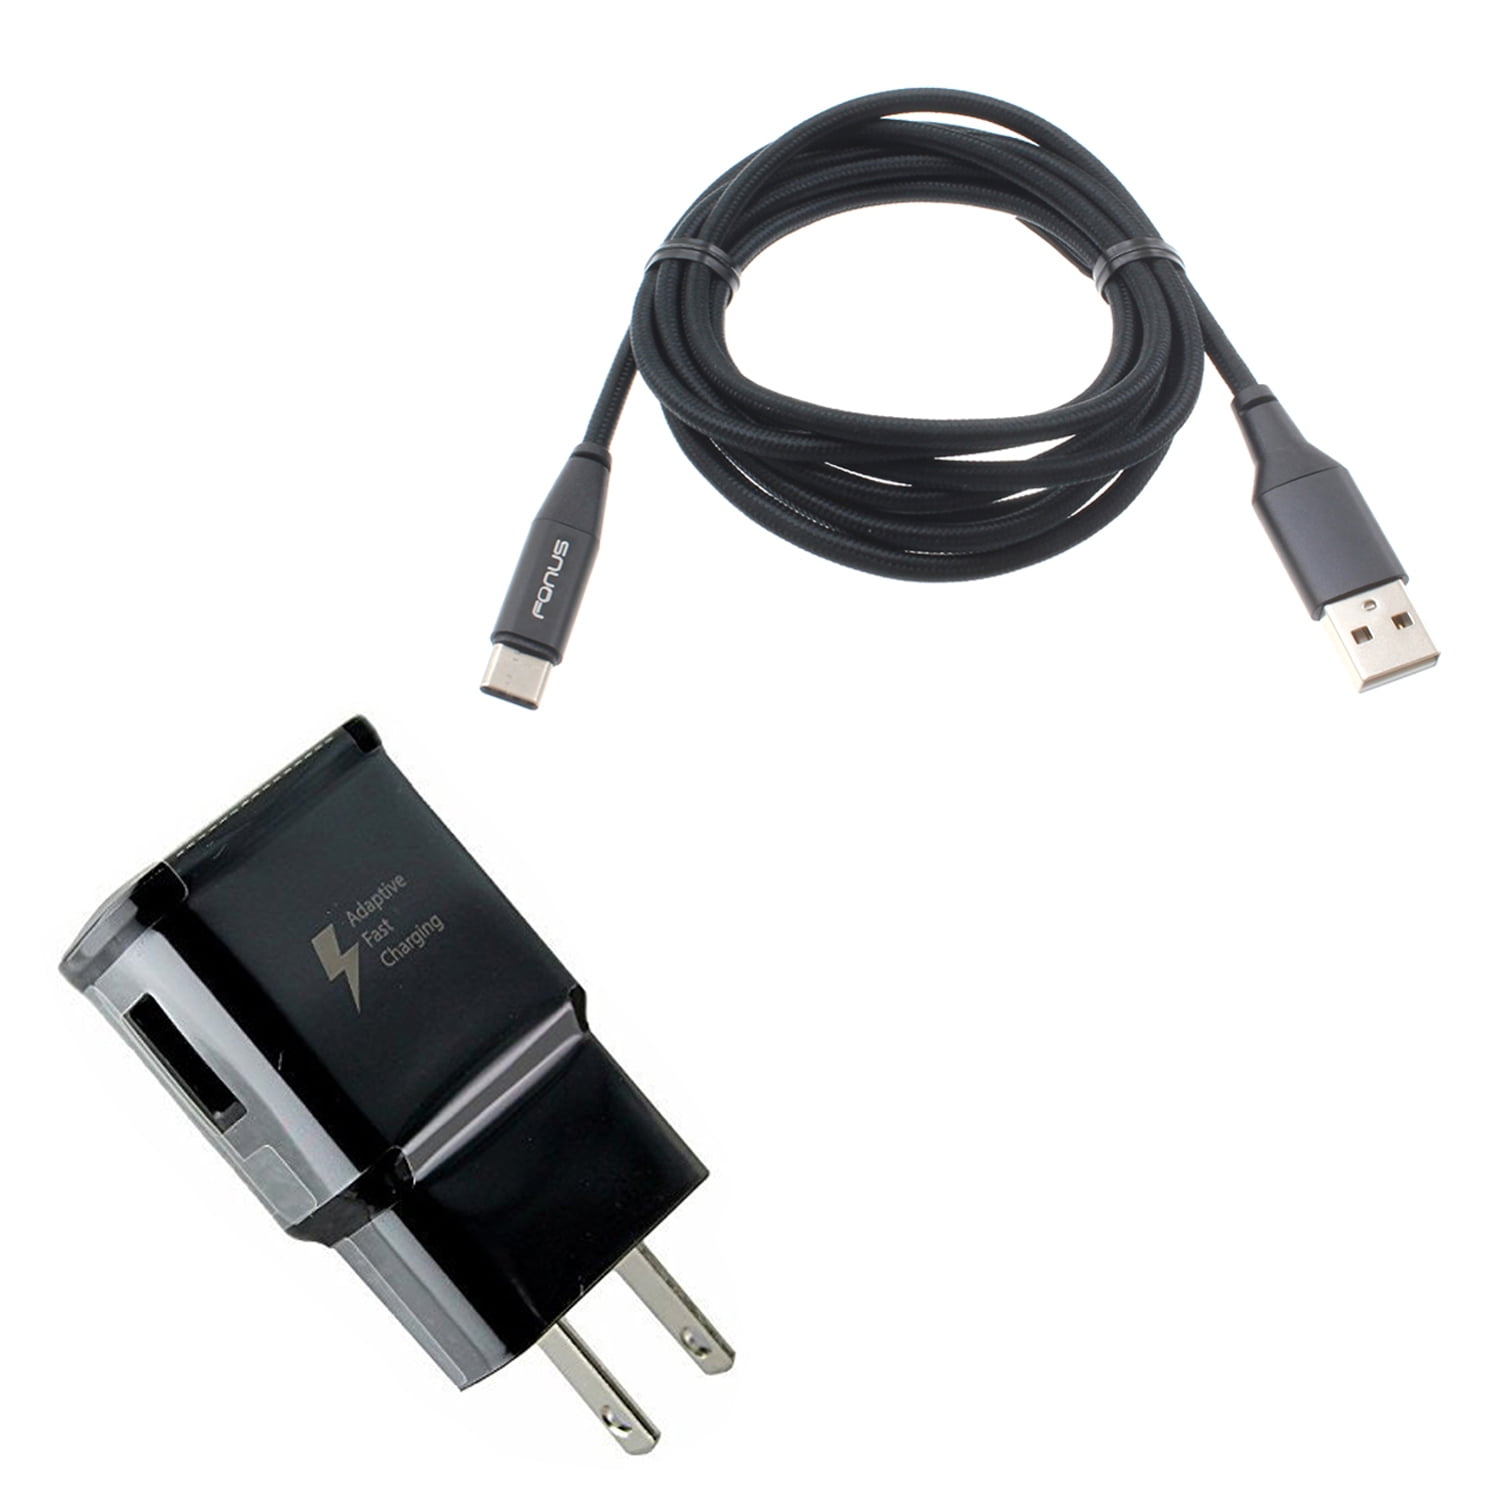 Samsung galaxy tablet charger